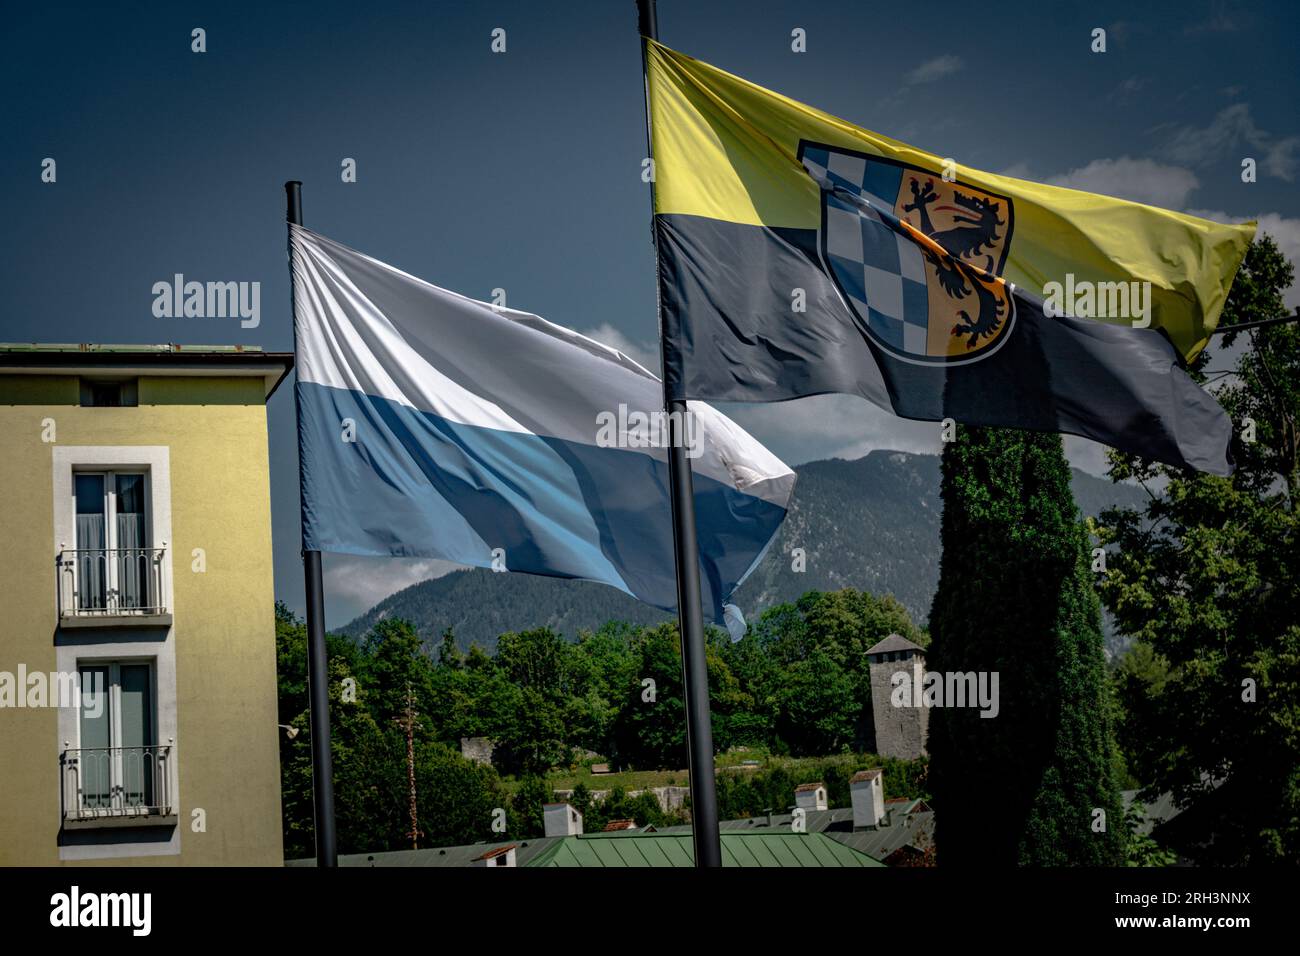 Bavarian and Bavarian munich flags stand right next to each other and wave tautly in the wind. The mountains of Bavaria and the blue cloudy sky Stock Photo